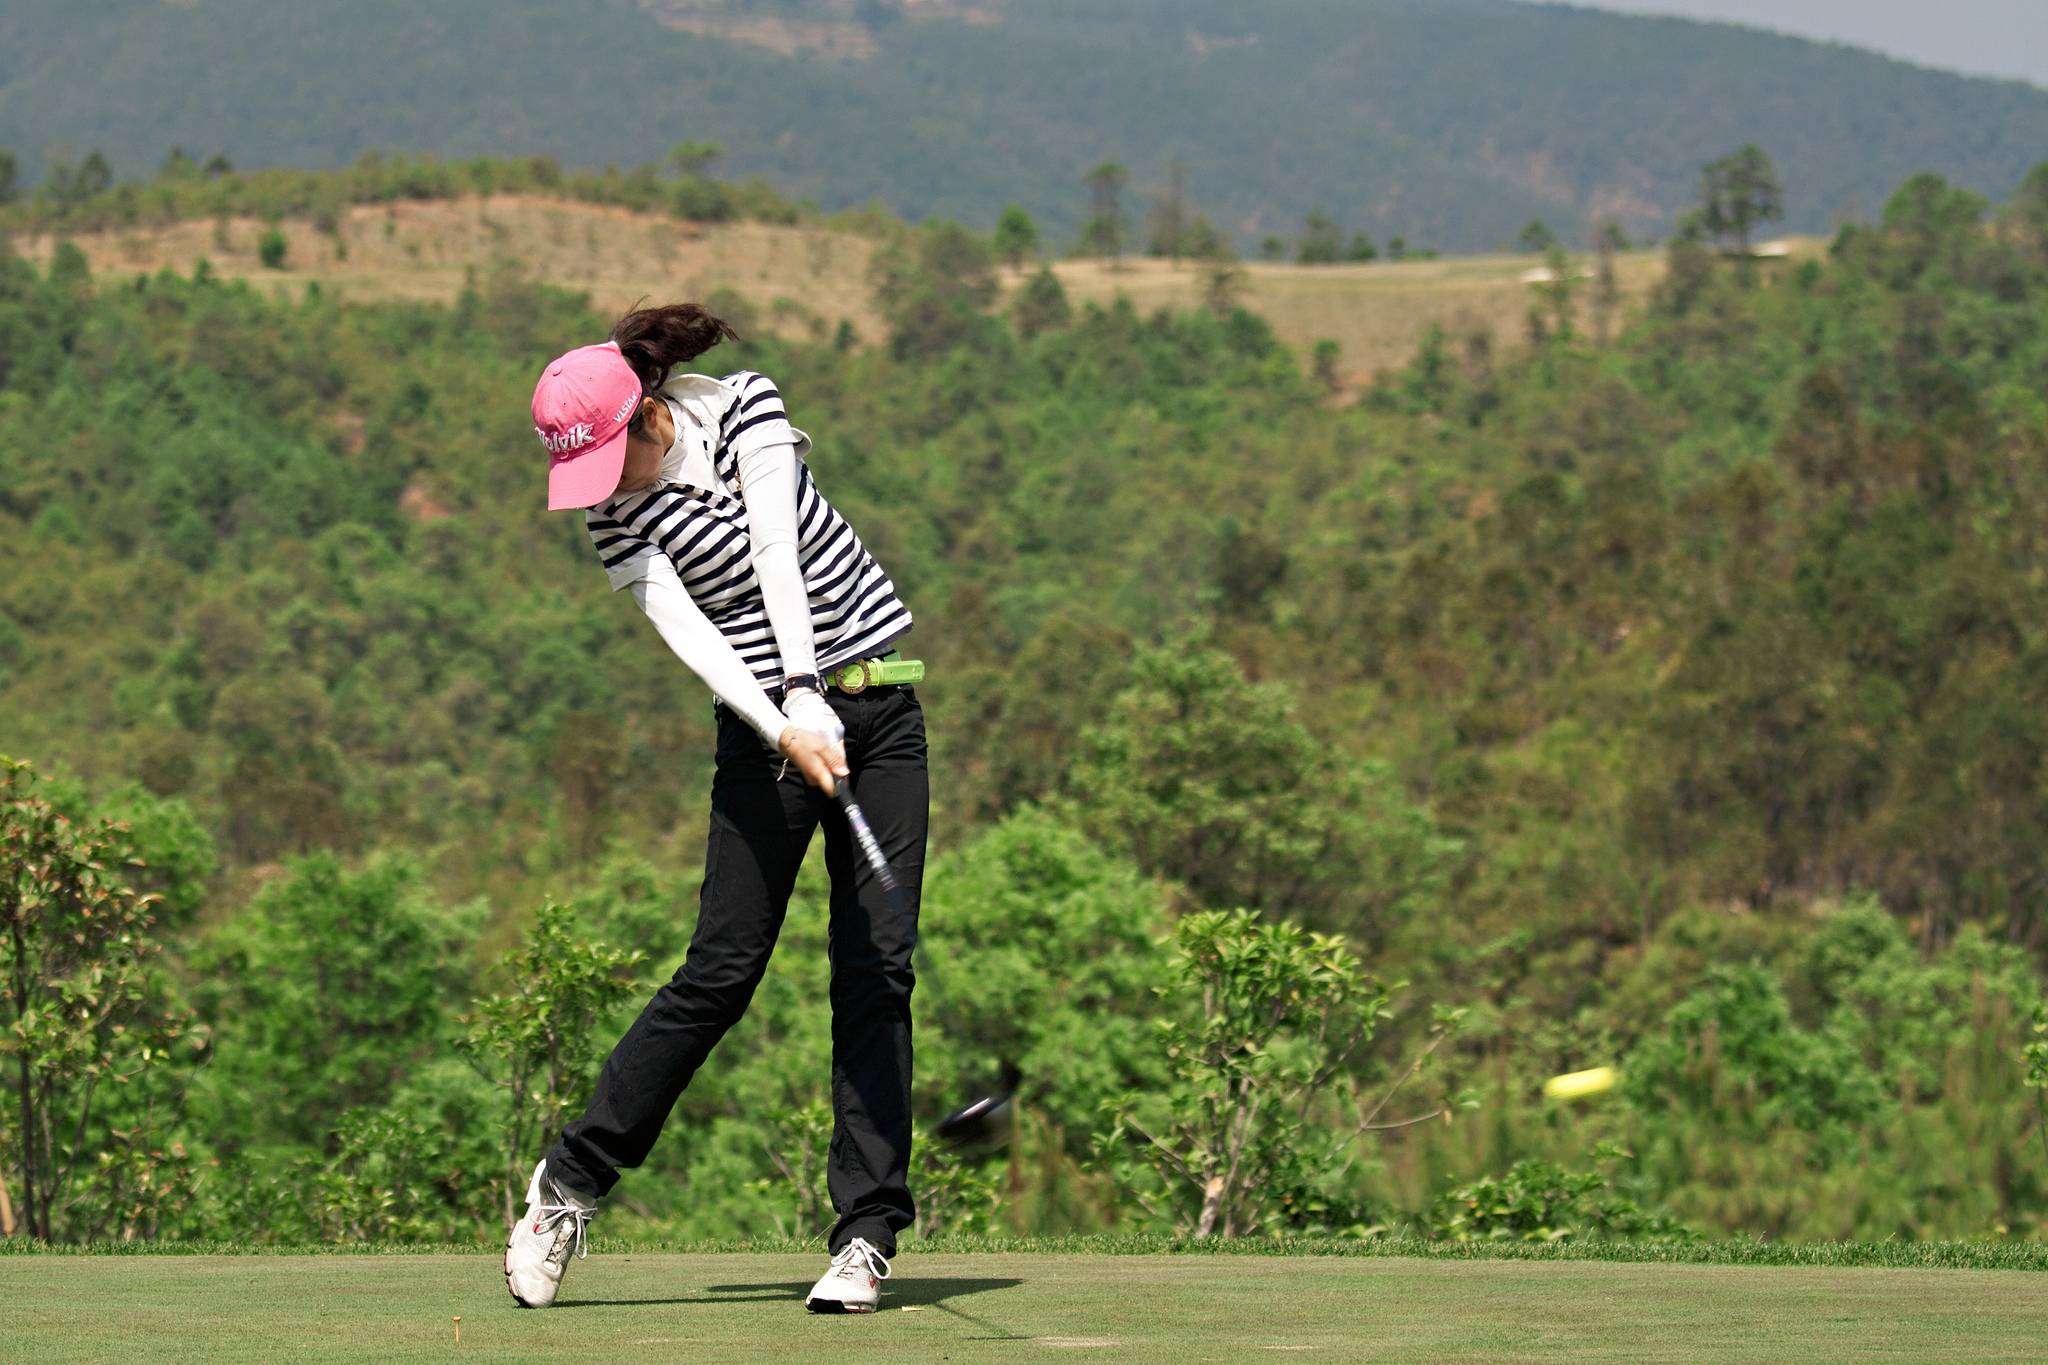 Golf is now a mandatory subject in a Chinese school